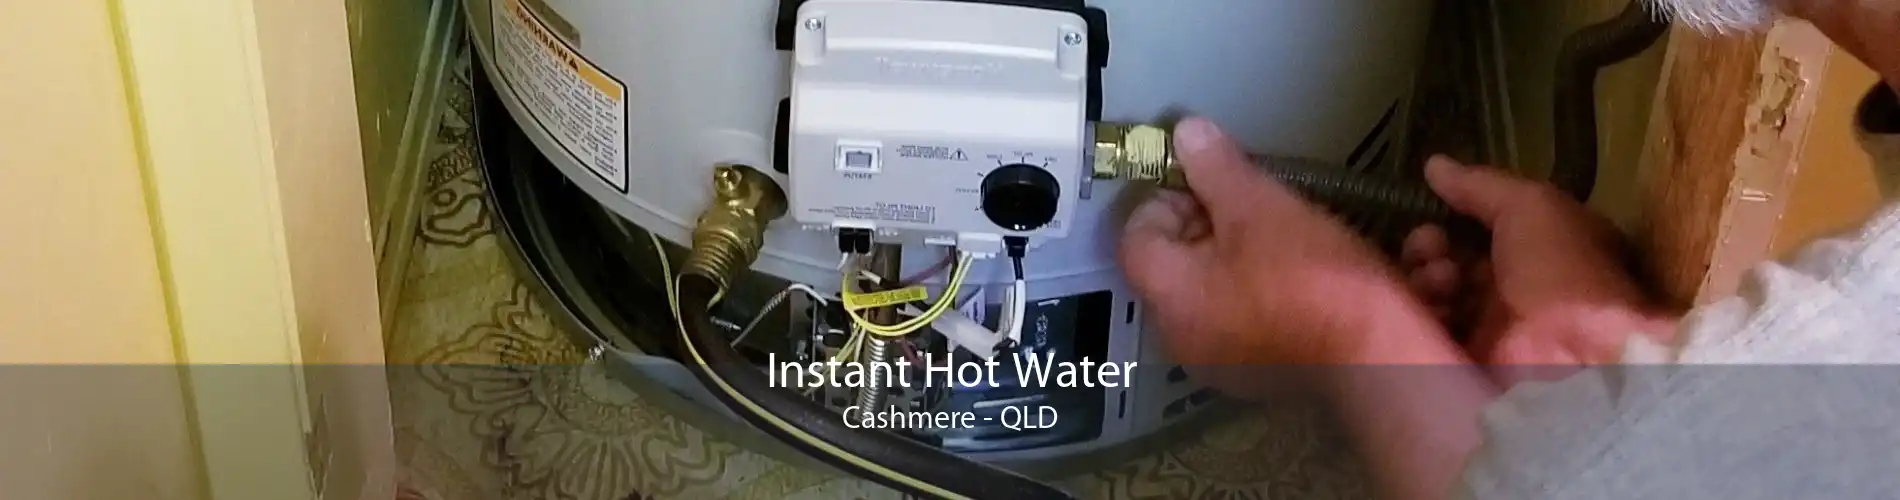 Instant Hot Water Cashmere - QLD